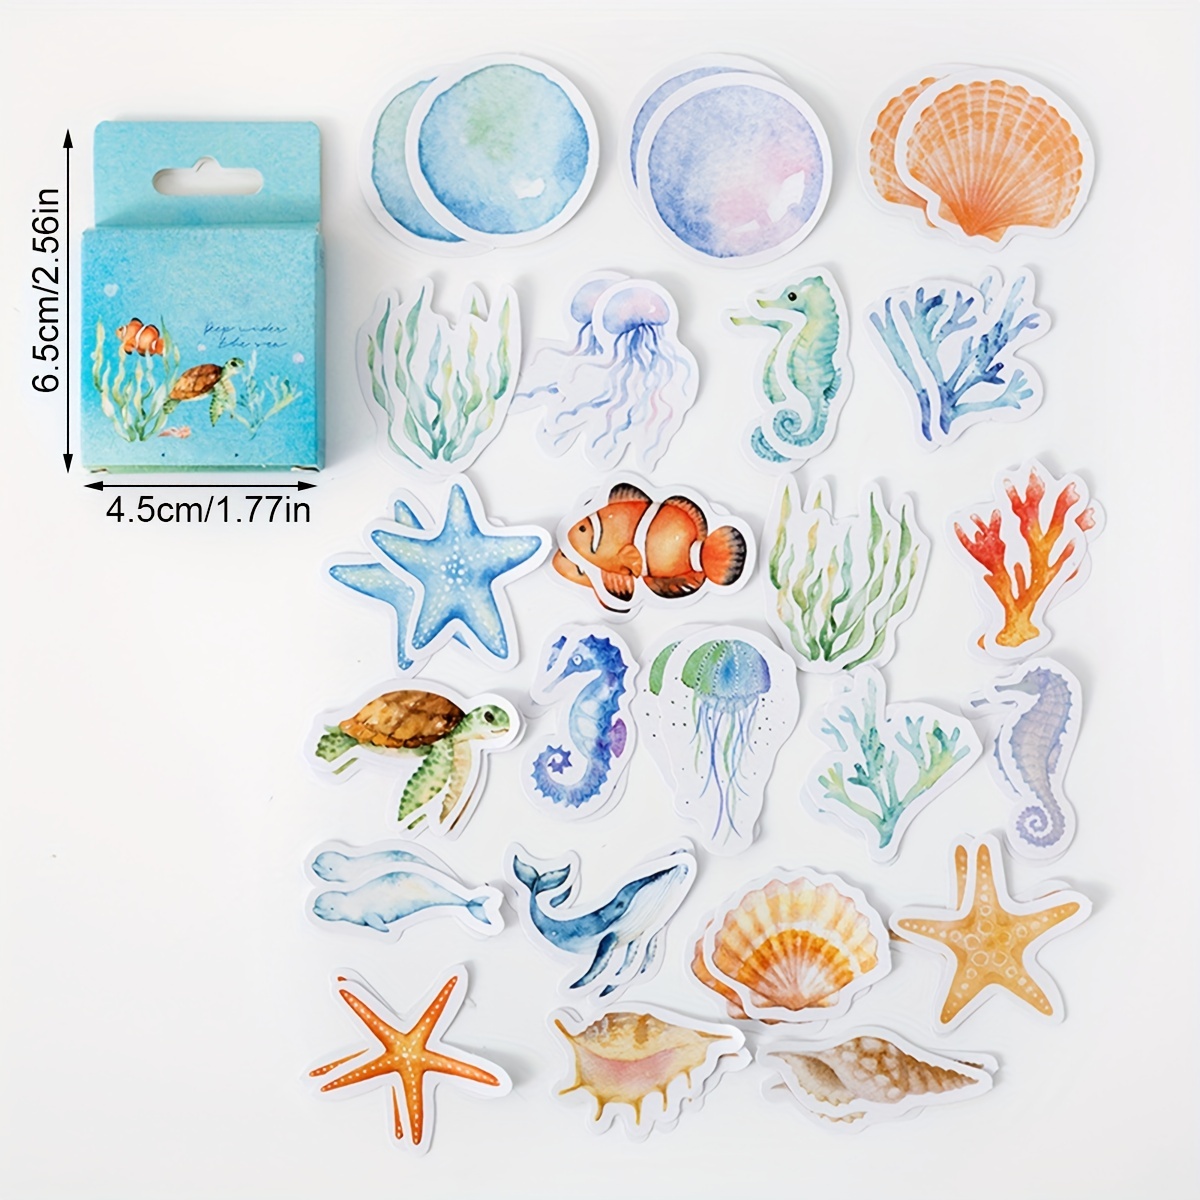 Kids Sea Shell Painting Kit - Arts & Crafts Gifts for Boys and Girls - Craft  Activities Kits - Creative Art Activity Gift